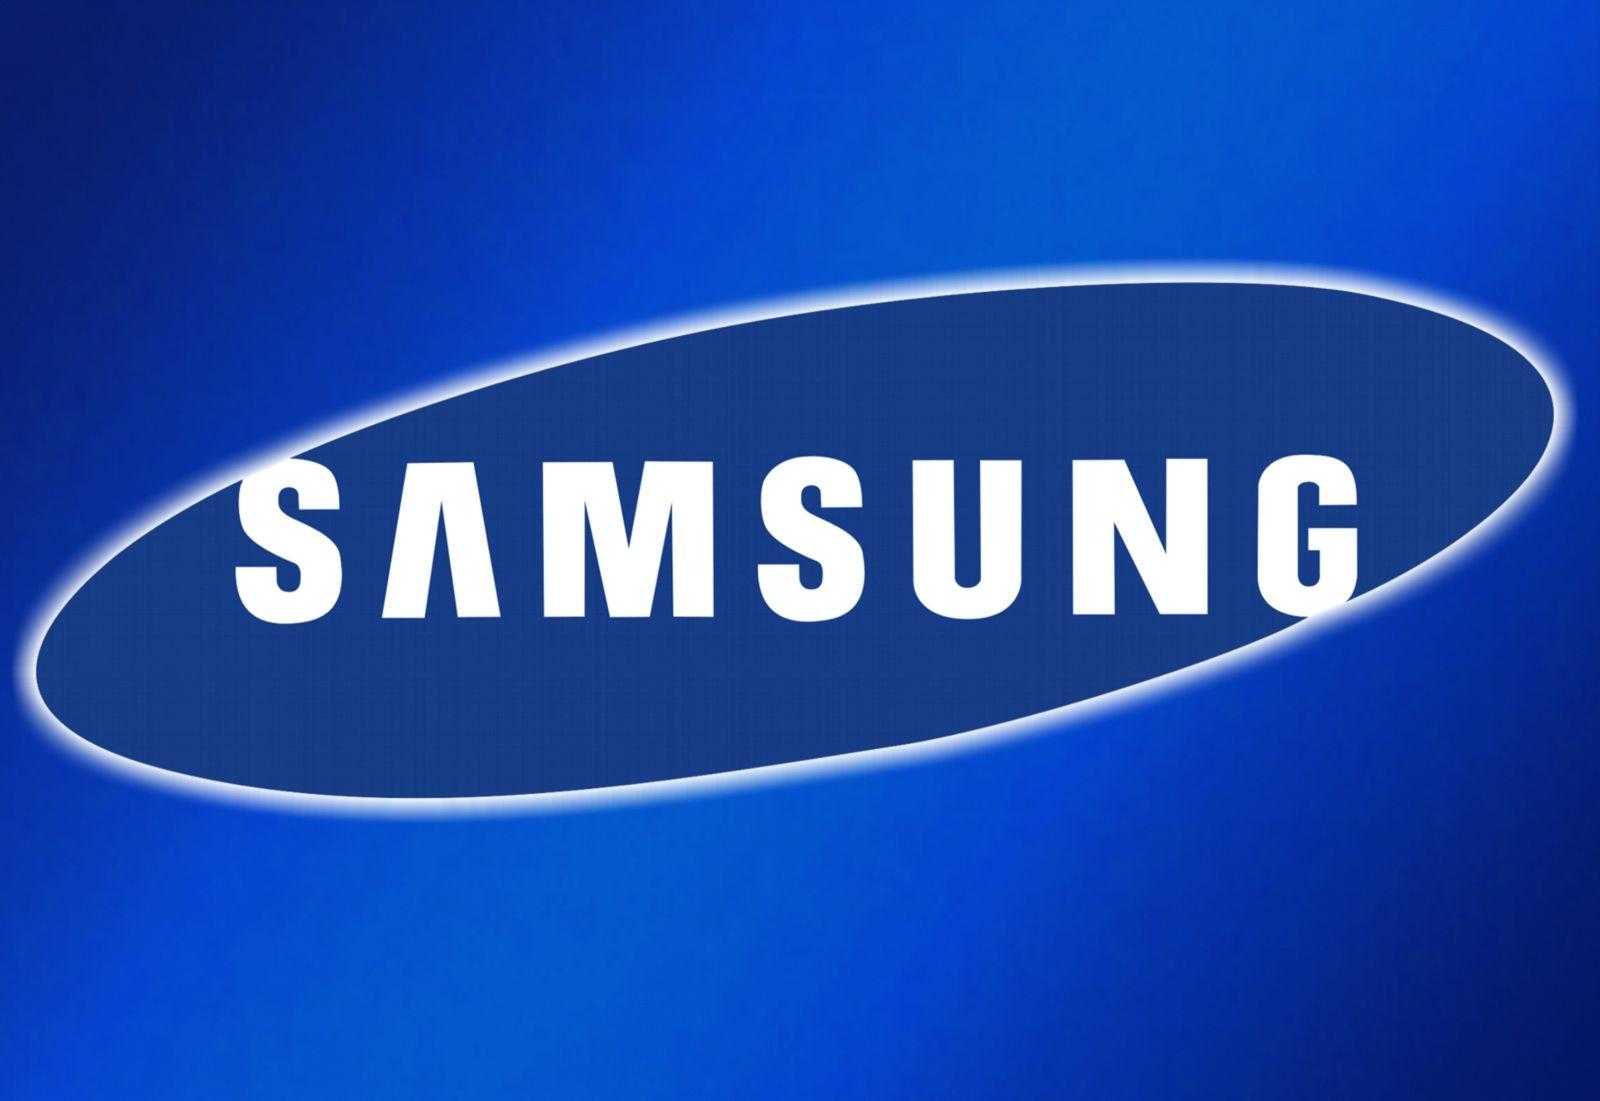 Samsung Company Logo - Samsung wants more Iran oil projects